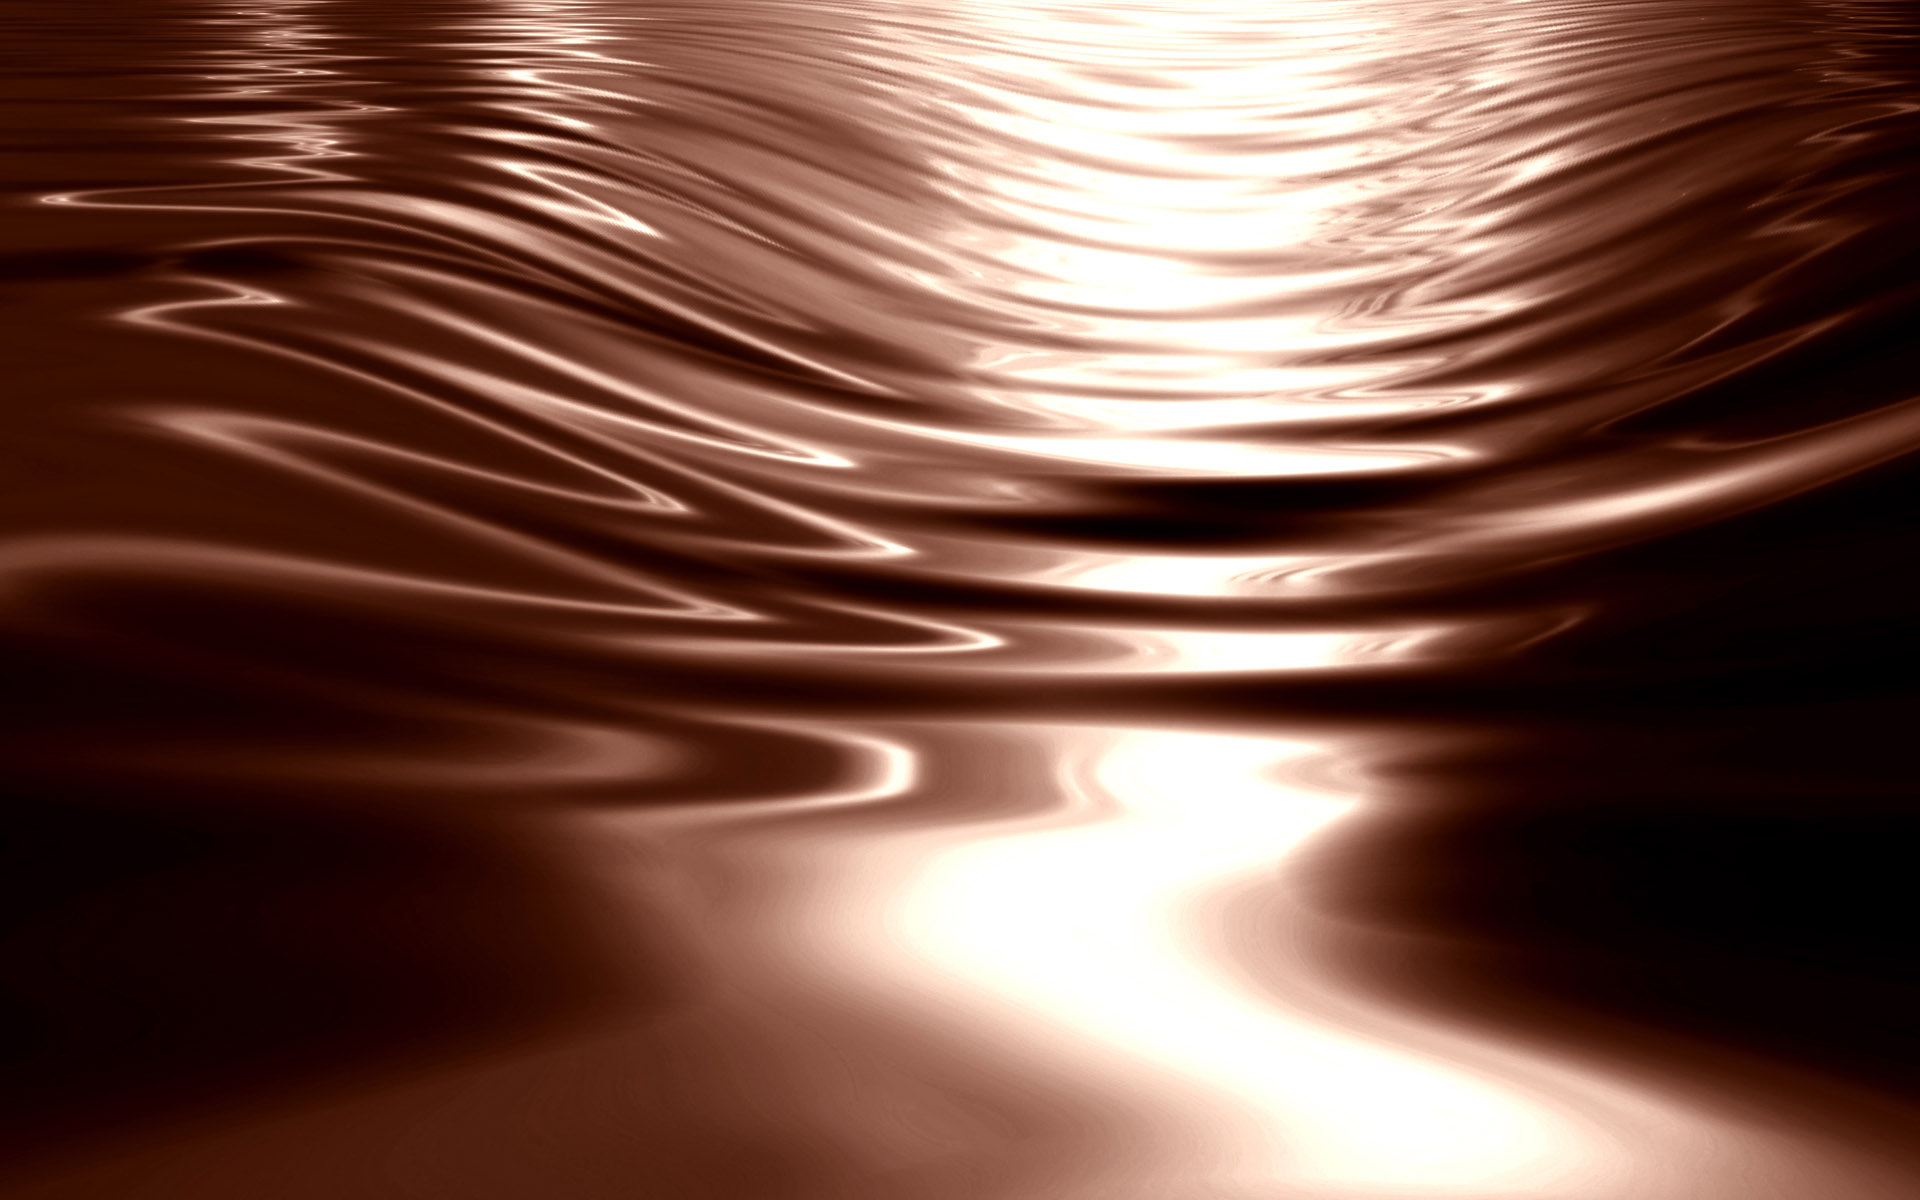 HD Melted Chocolate Wallpaper for Desktop Full Size